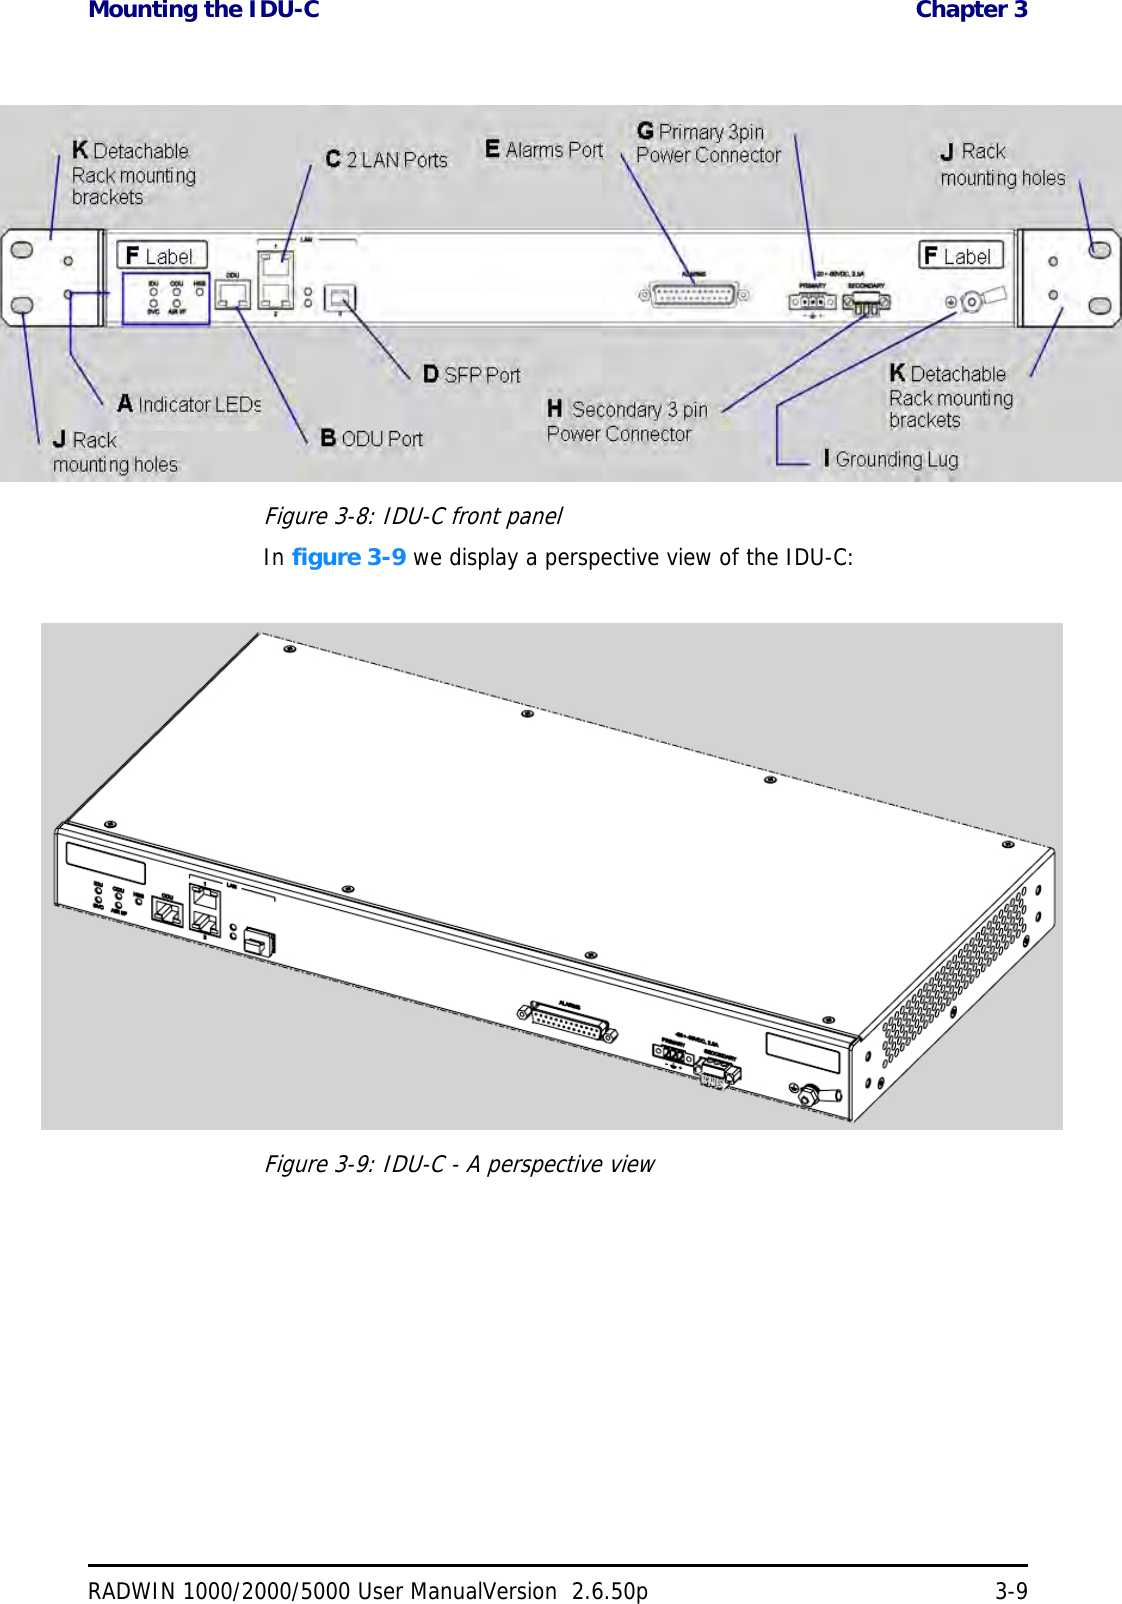 Mounting the IDU-C  Chapter 3RADWIN 1000/2000/5000 User ManualVersion  2.6.50p 3-9Figure 3-8: IDU-C front panelIn figure 3-9 we display a perspective view of the IDU-C:Figure 3-9: IDU-C - A perspective view